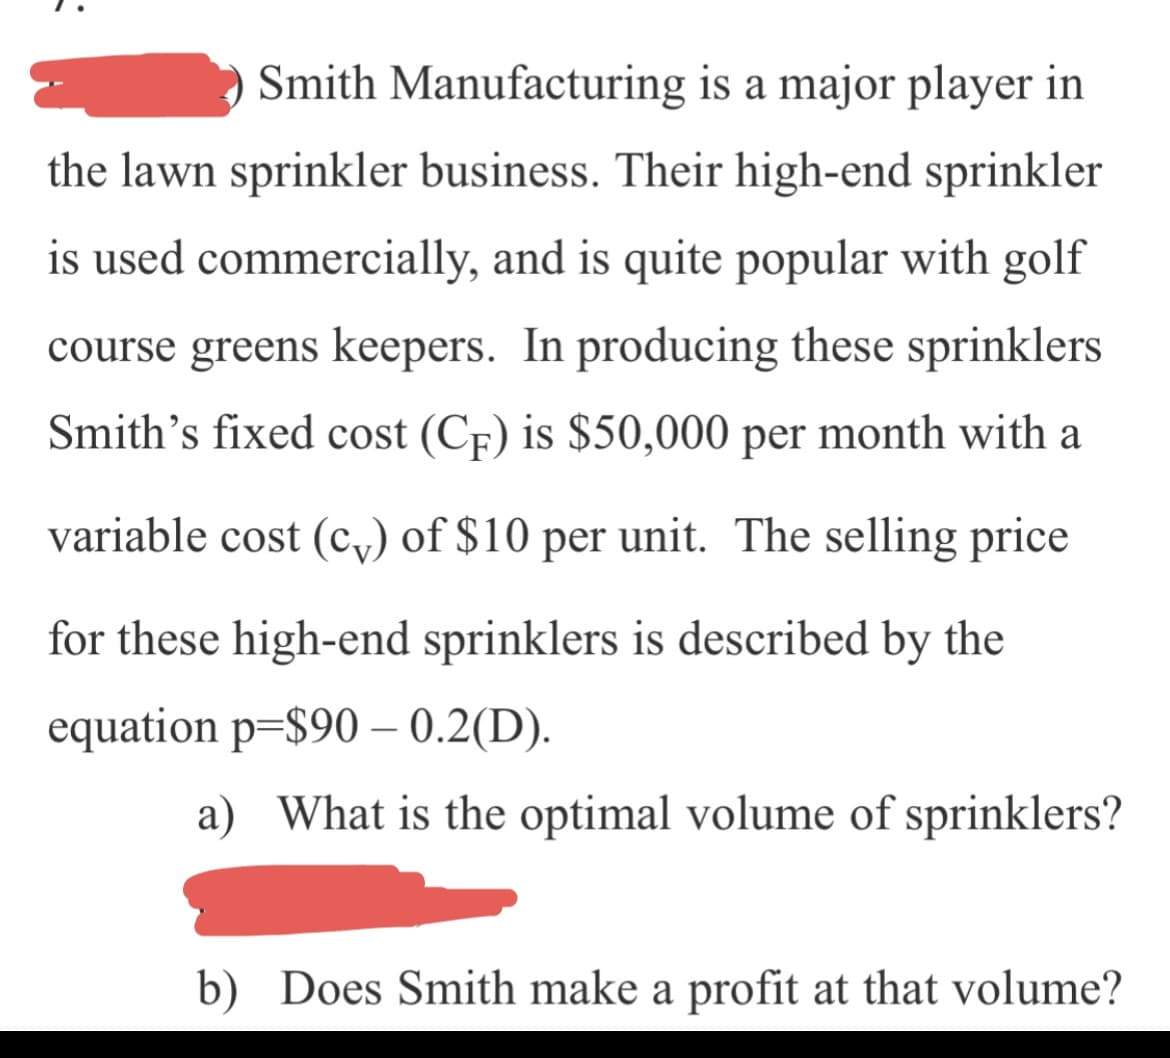 Smith Manufacturing is a major player in
the lawn sprinkler business. Their high-end sprinkler
is used commercially, and is quite popular with golf
course greens keepers. In producing these sprinklers
Smith's fixed cost (CF) is $50,000 per month with a
variable cost (c,) of $10 per unit. The selling price
for these high-end sprinklers is described by the
equation p=$90 – 0.2(D).
a) What is the optimal volume of sprinklers?
b) Does Smith make a profit at that volume?
